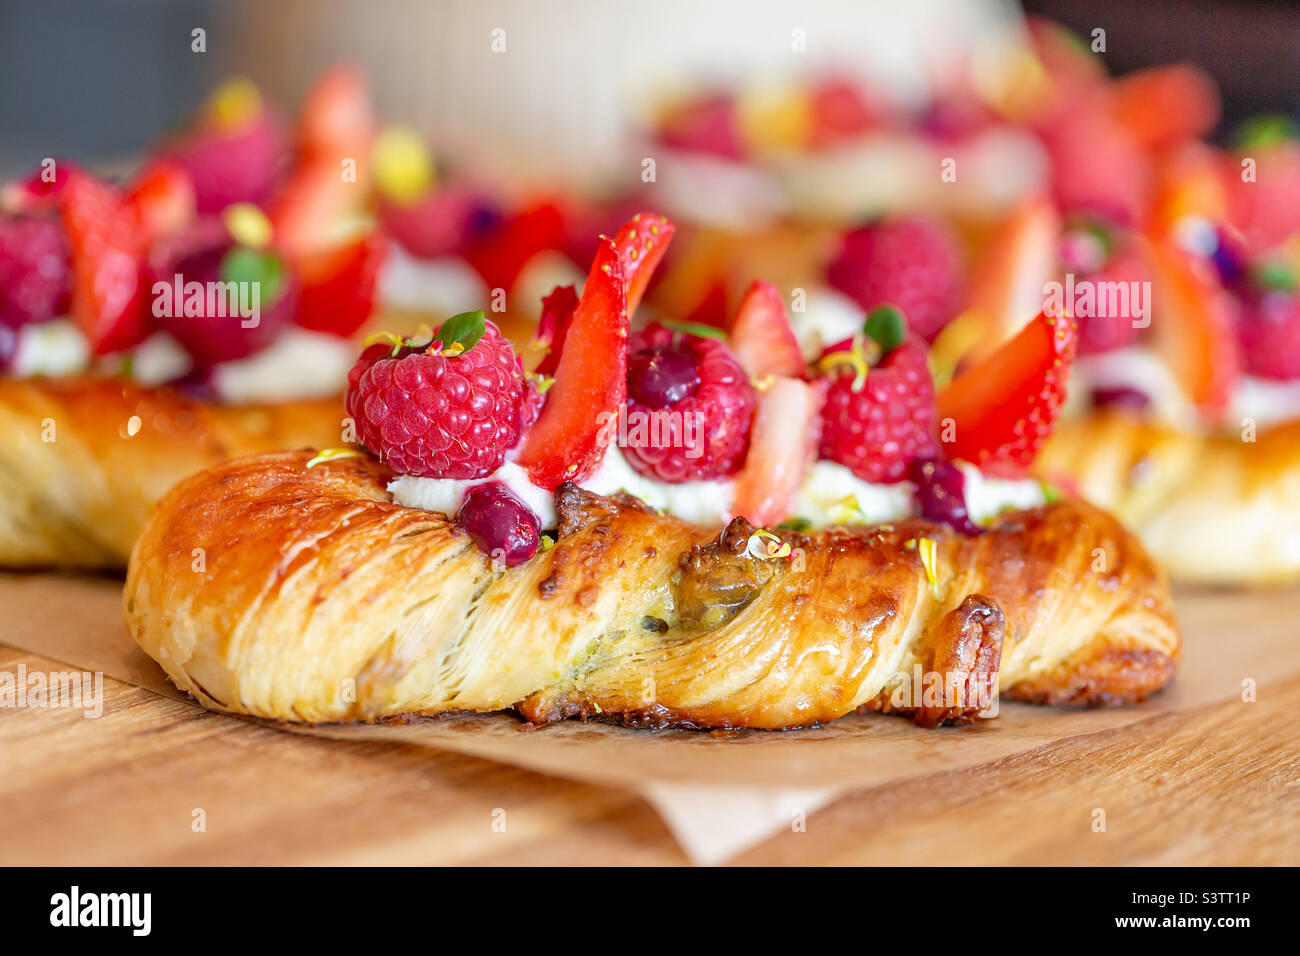 Delicious baked pastry with fresh berries, closeup Stock Photo